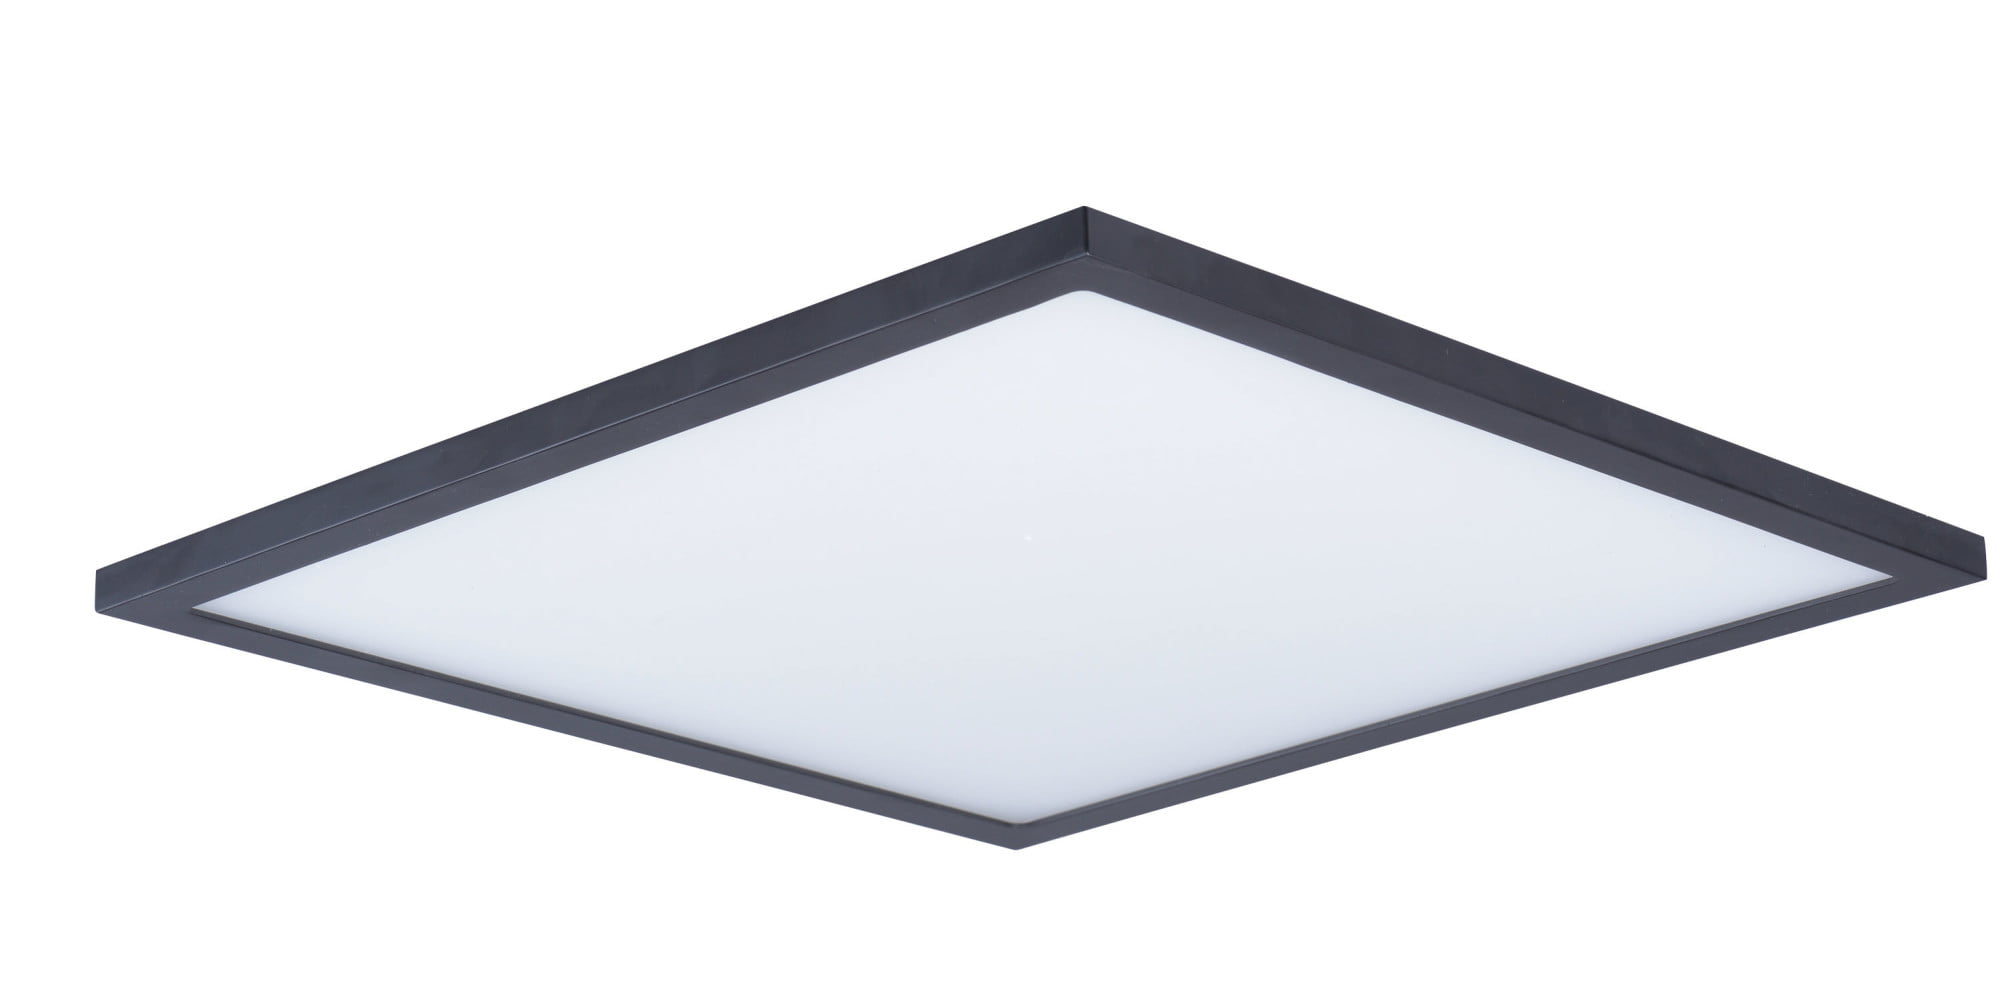 Maxim 57738 Wafer 15 Square Indoor Outdoor Led Ceiling Light